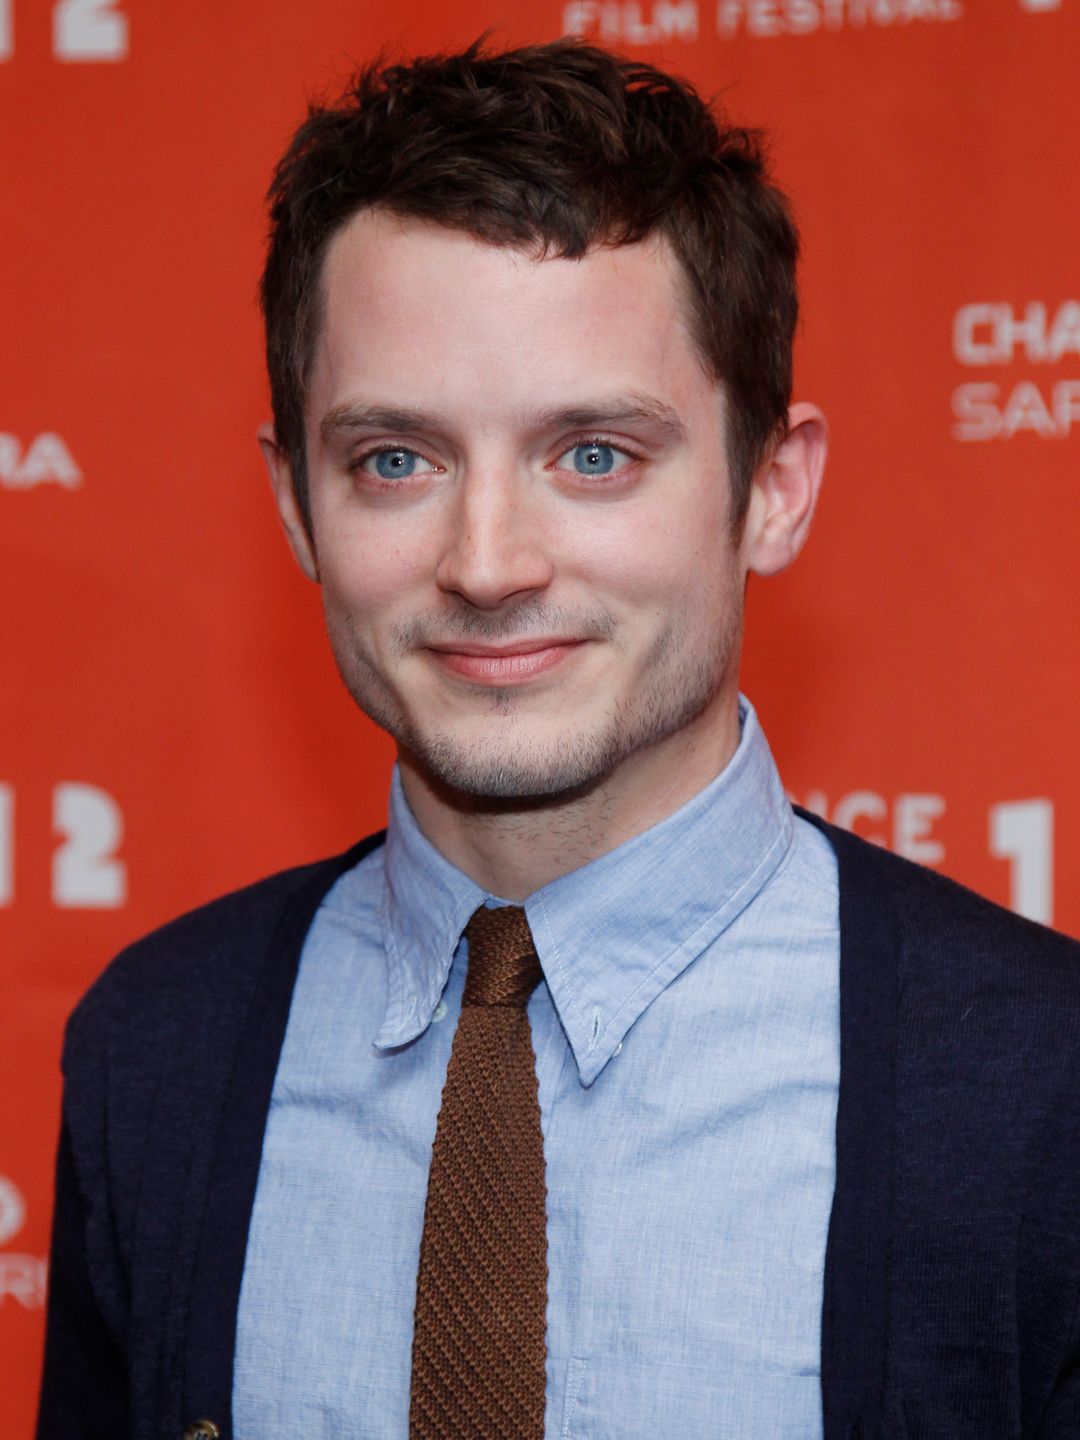 Elijah Wood does he have a wife